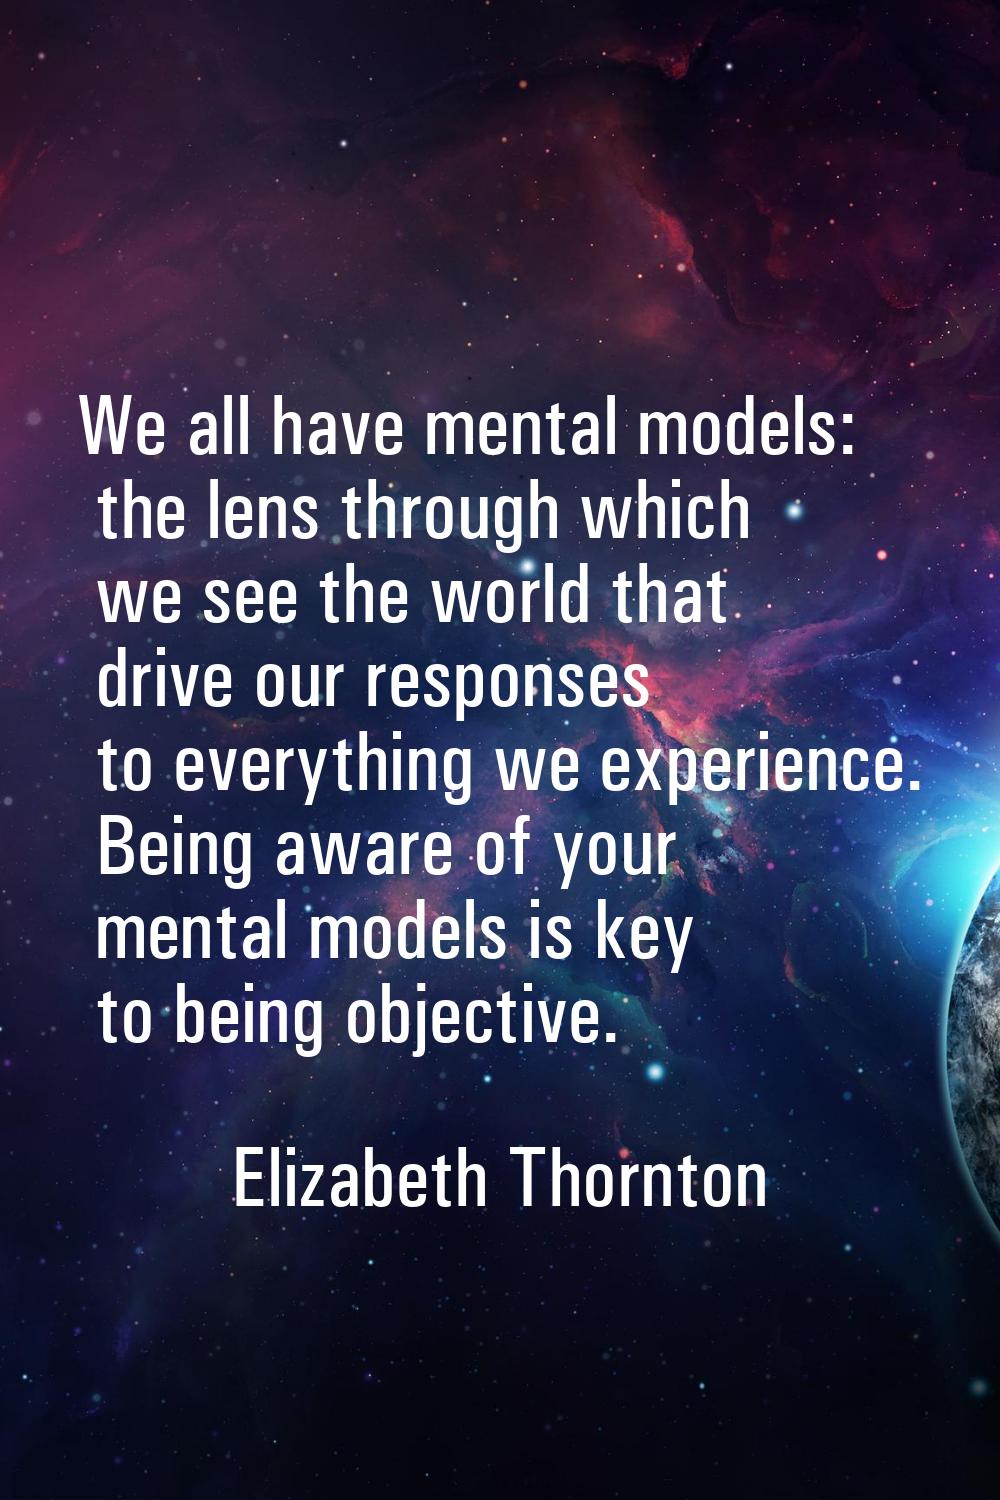 We all have mental models: the lens through which we see the world that drive our responses to ever